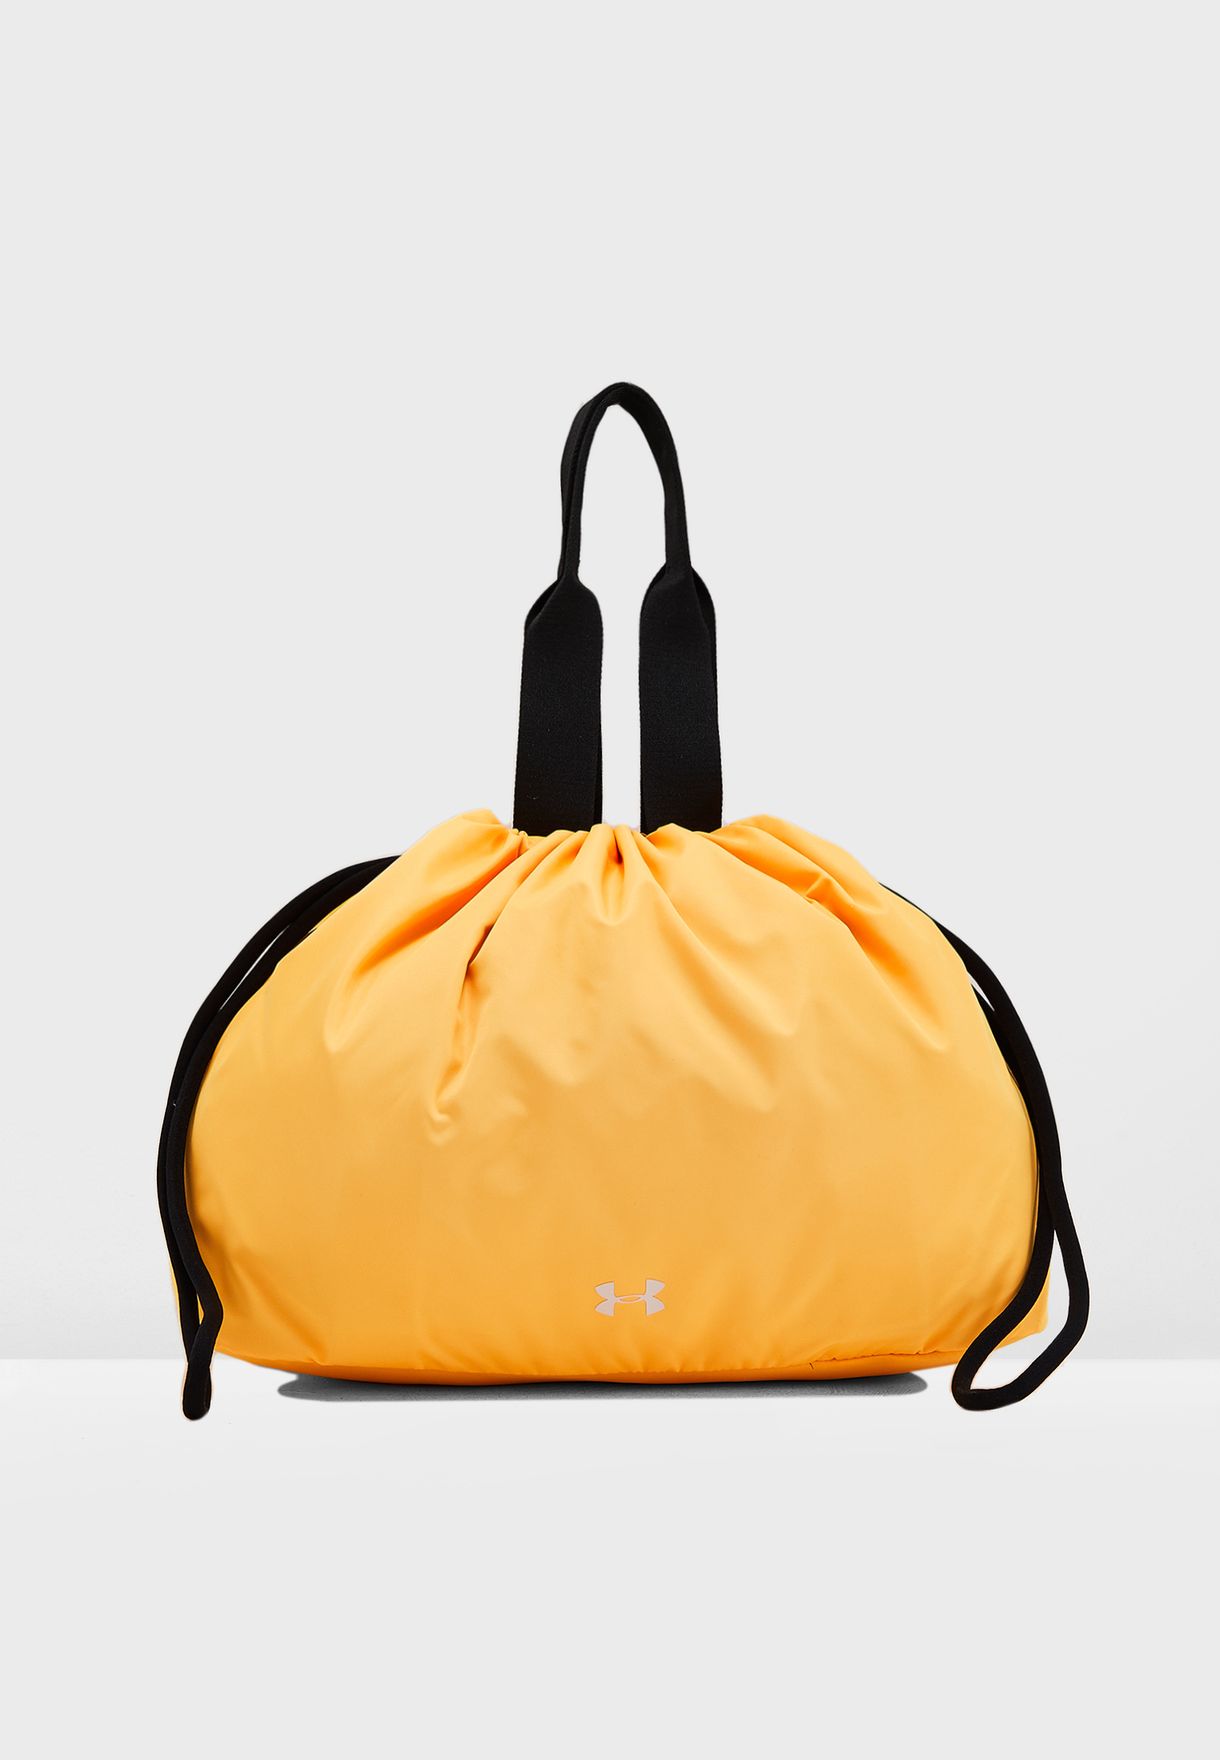 yellow under armour duffle bag